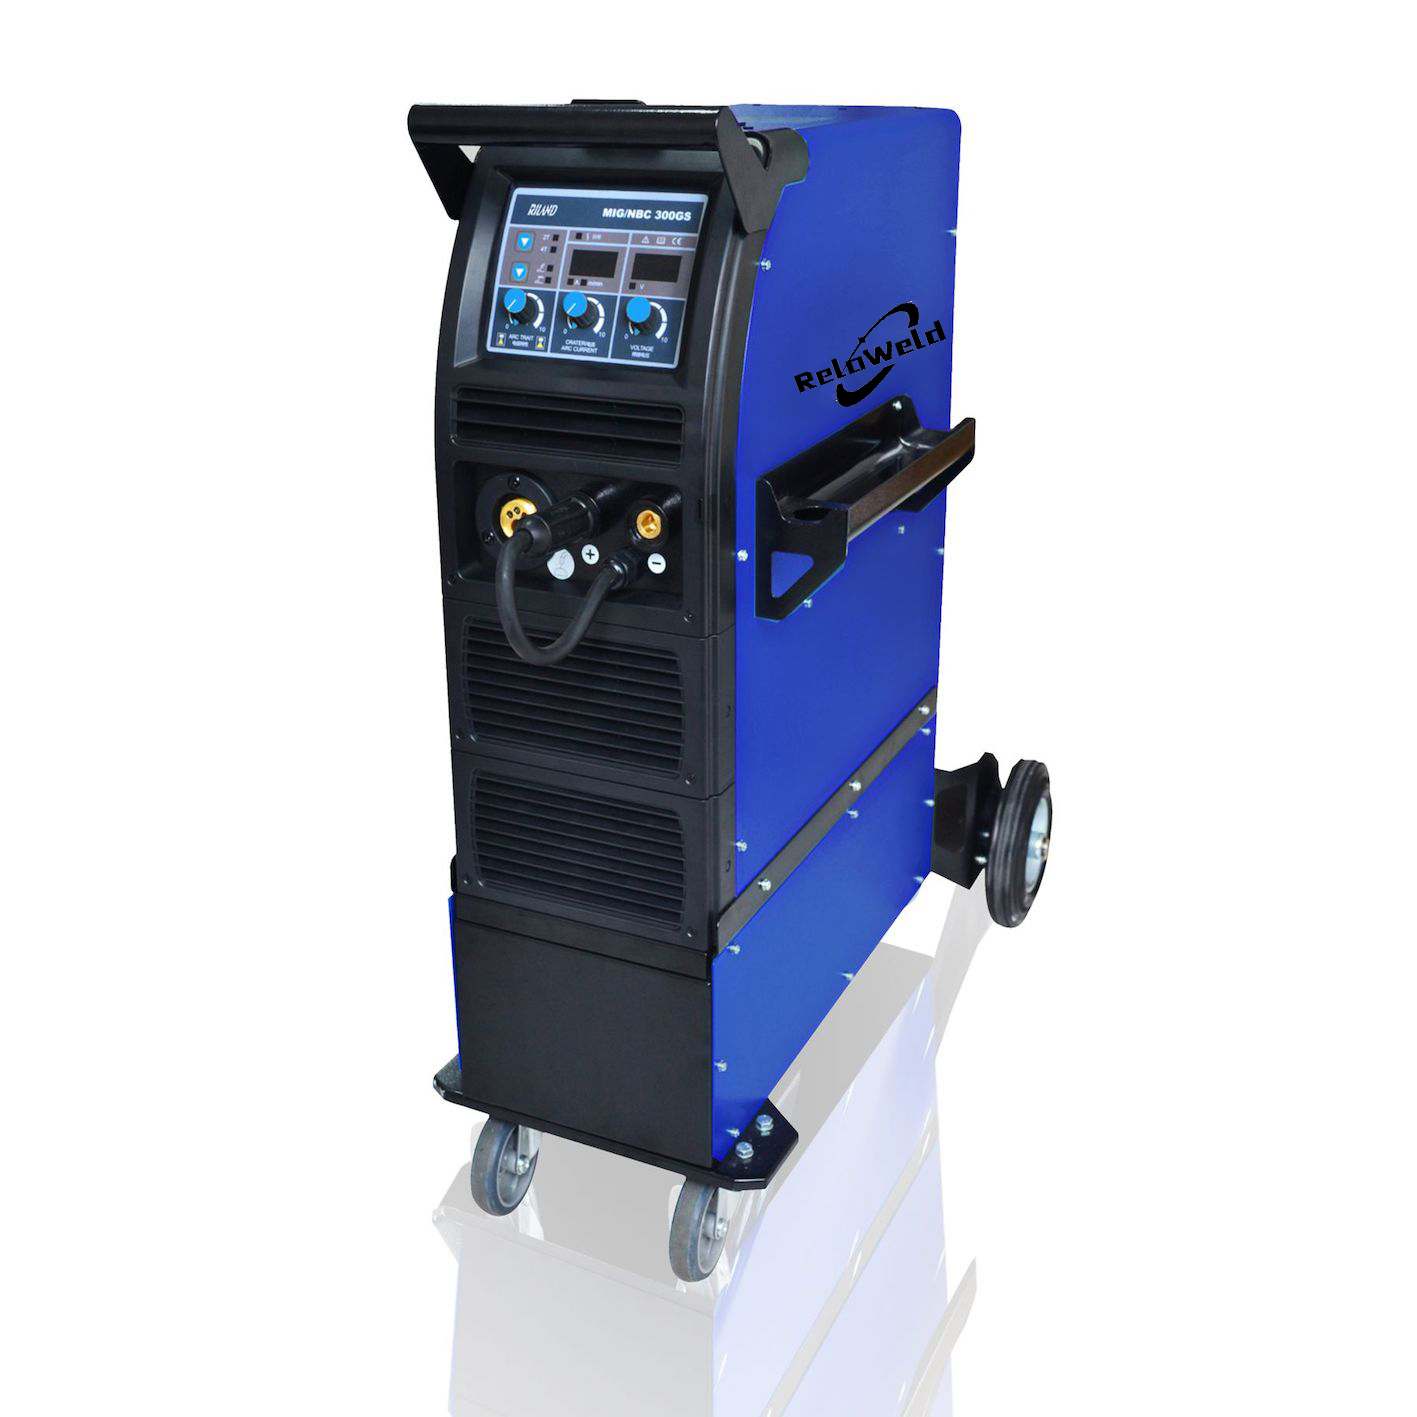 LED Display MIG 300GN/300GS MIG MAG Welding Machine